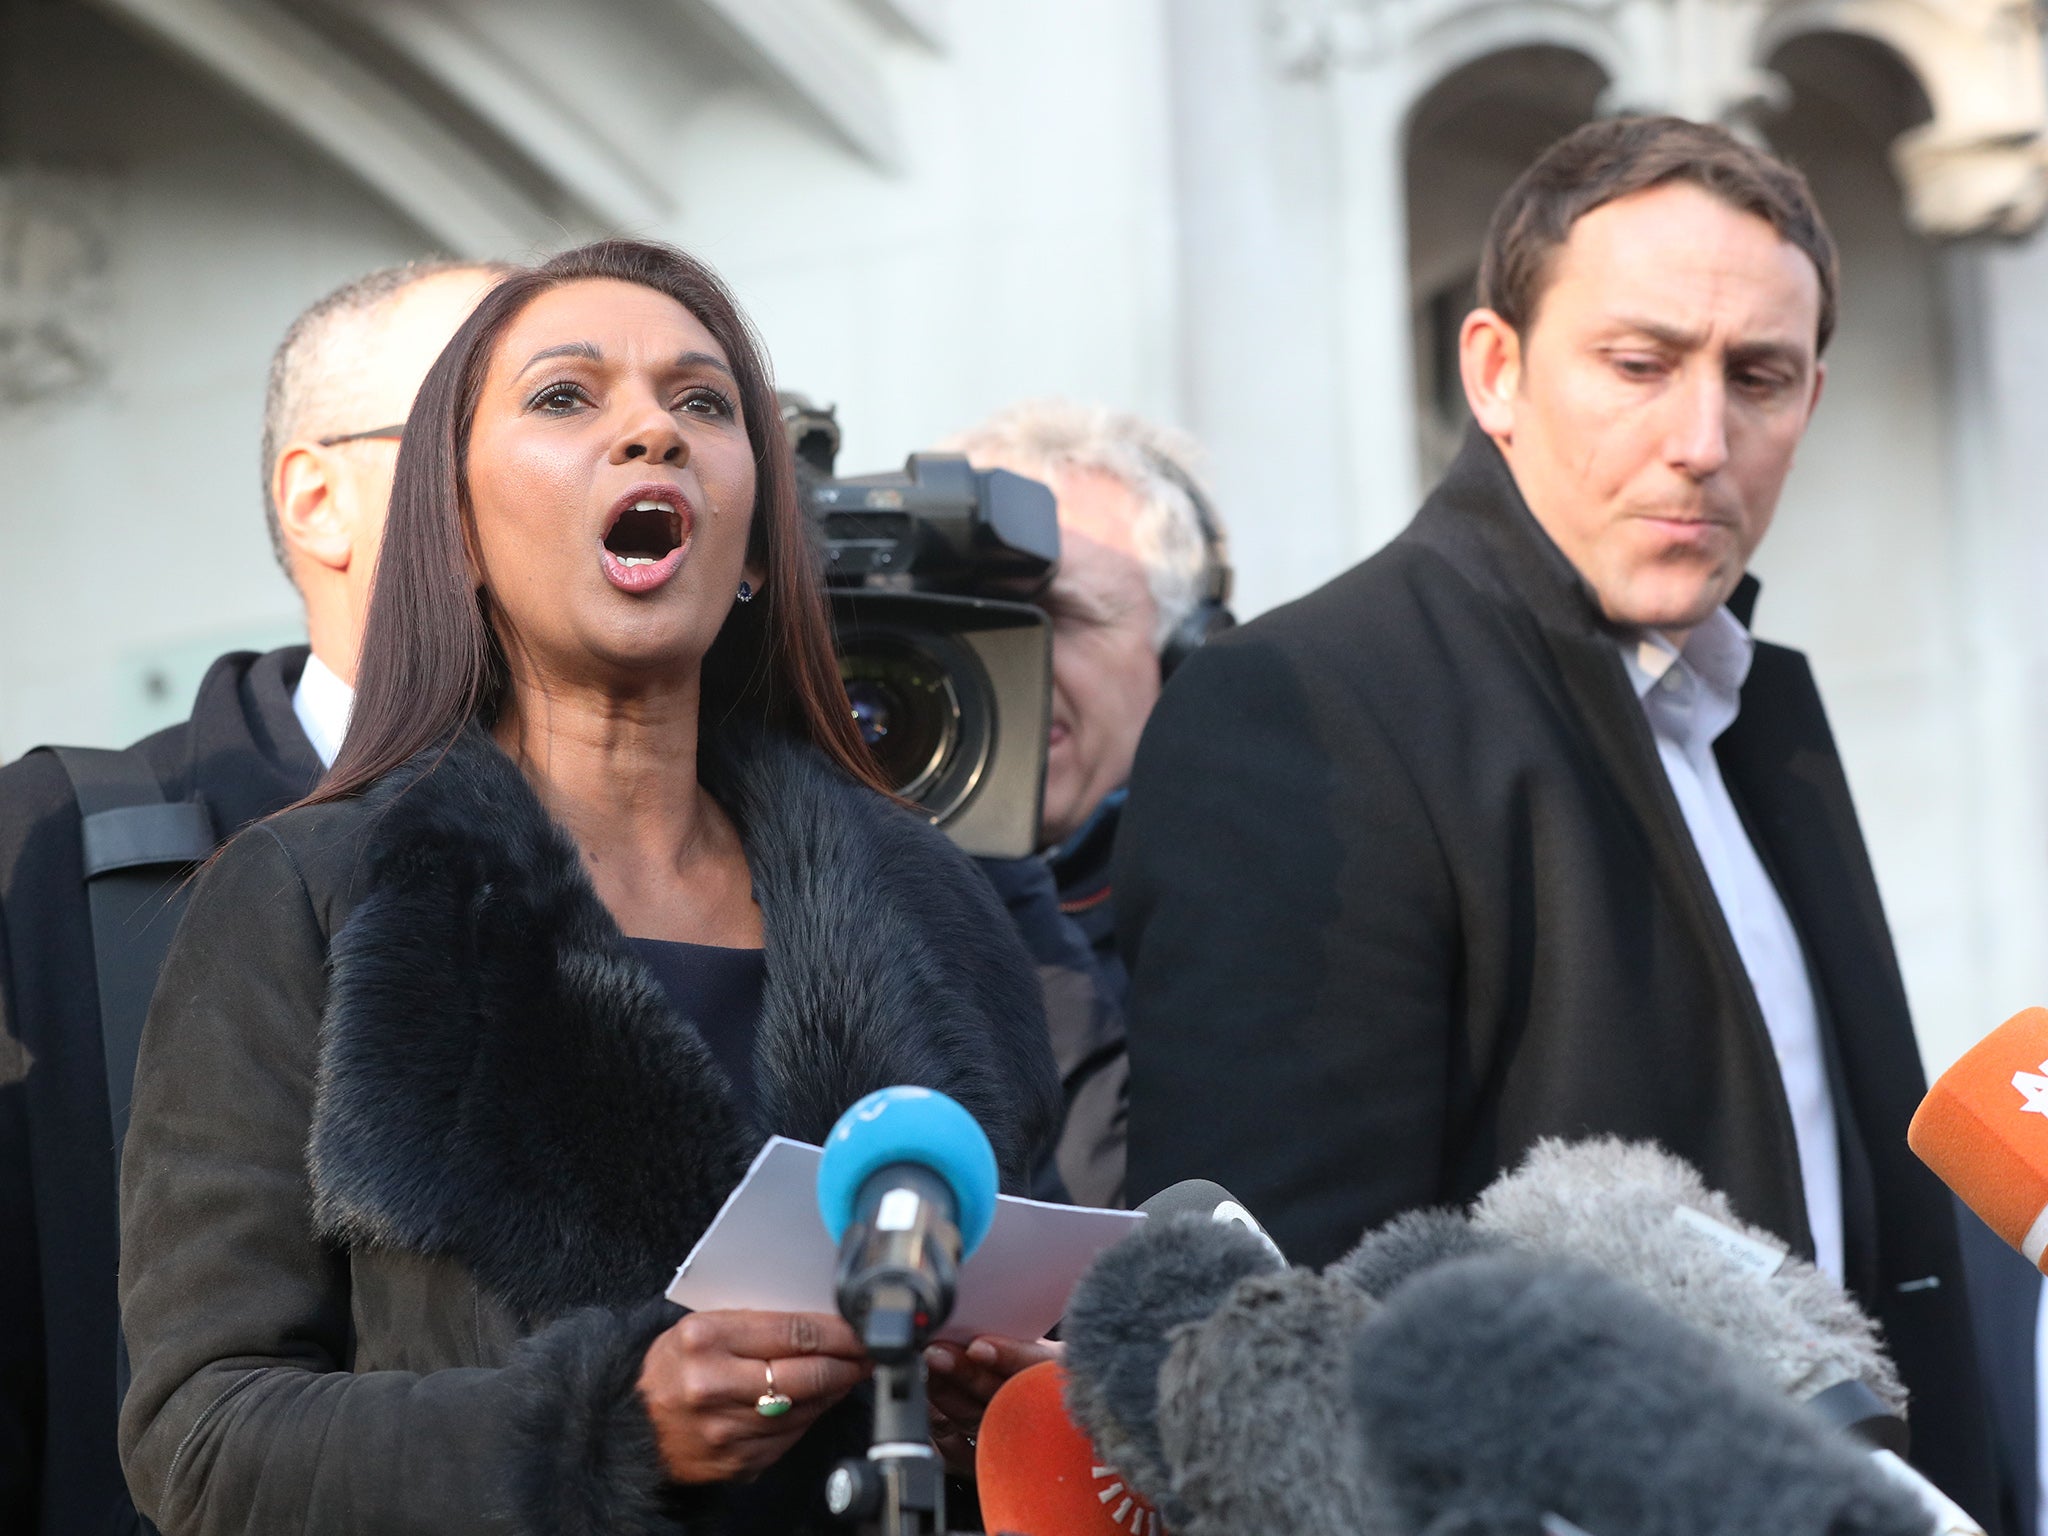 Gina Miller, the campaigner who launced the court case, outside the Supreme Court in London